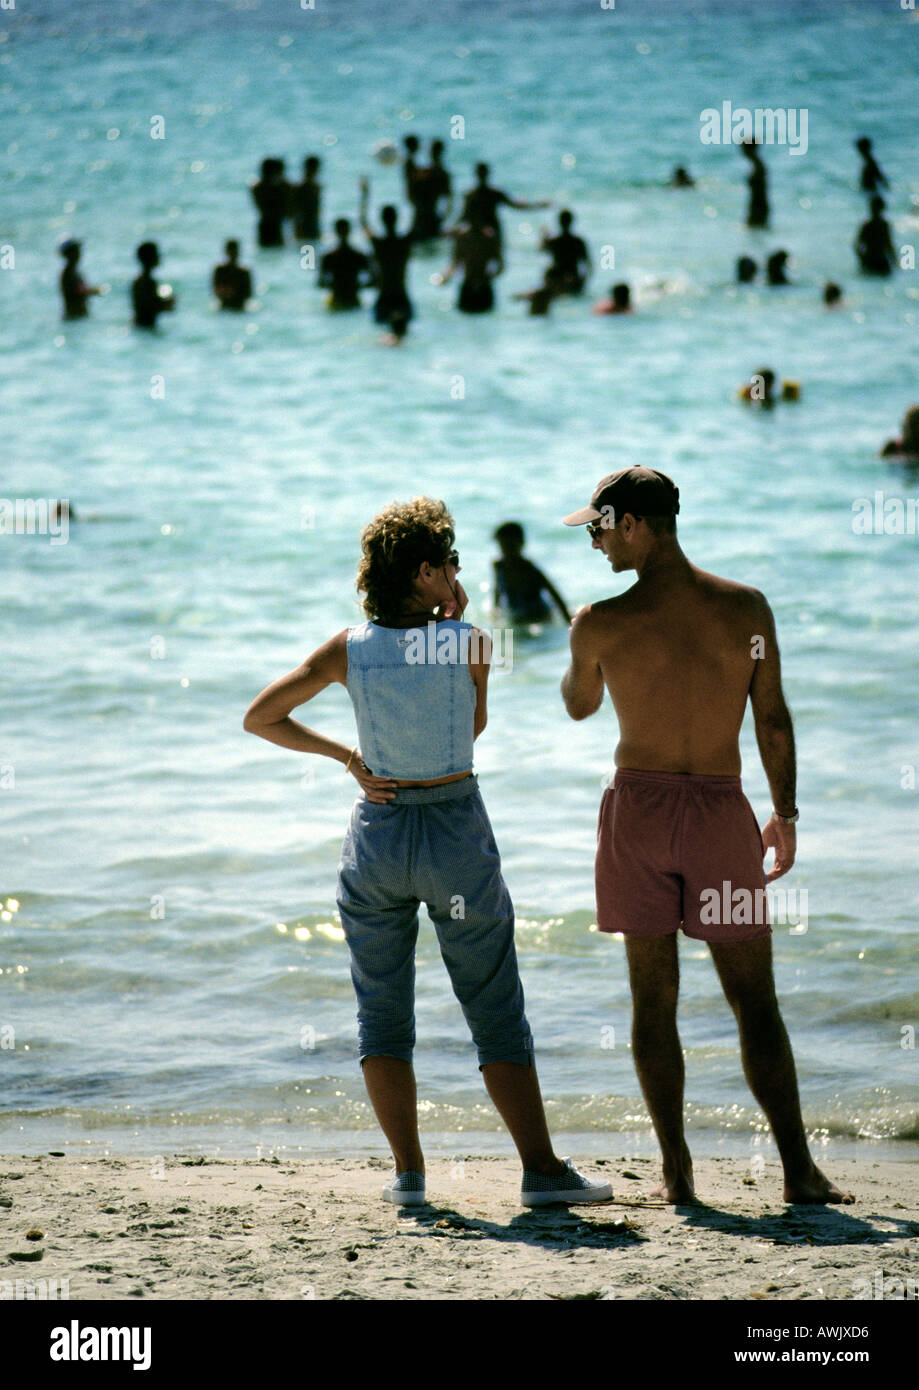 People standing at the beach, people playing in the water in background, rear view. Stock Photo